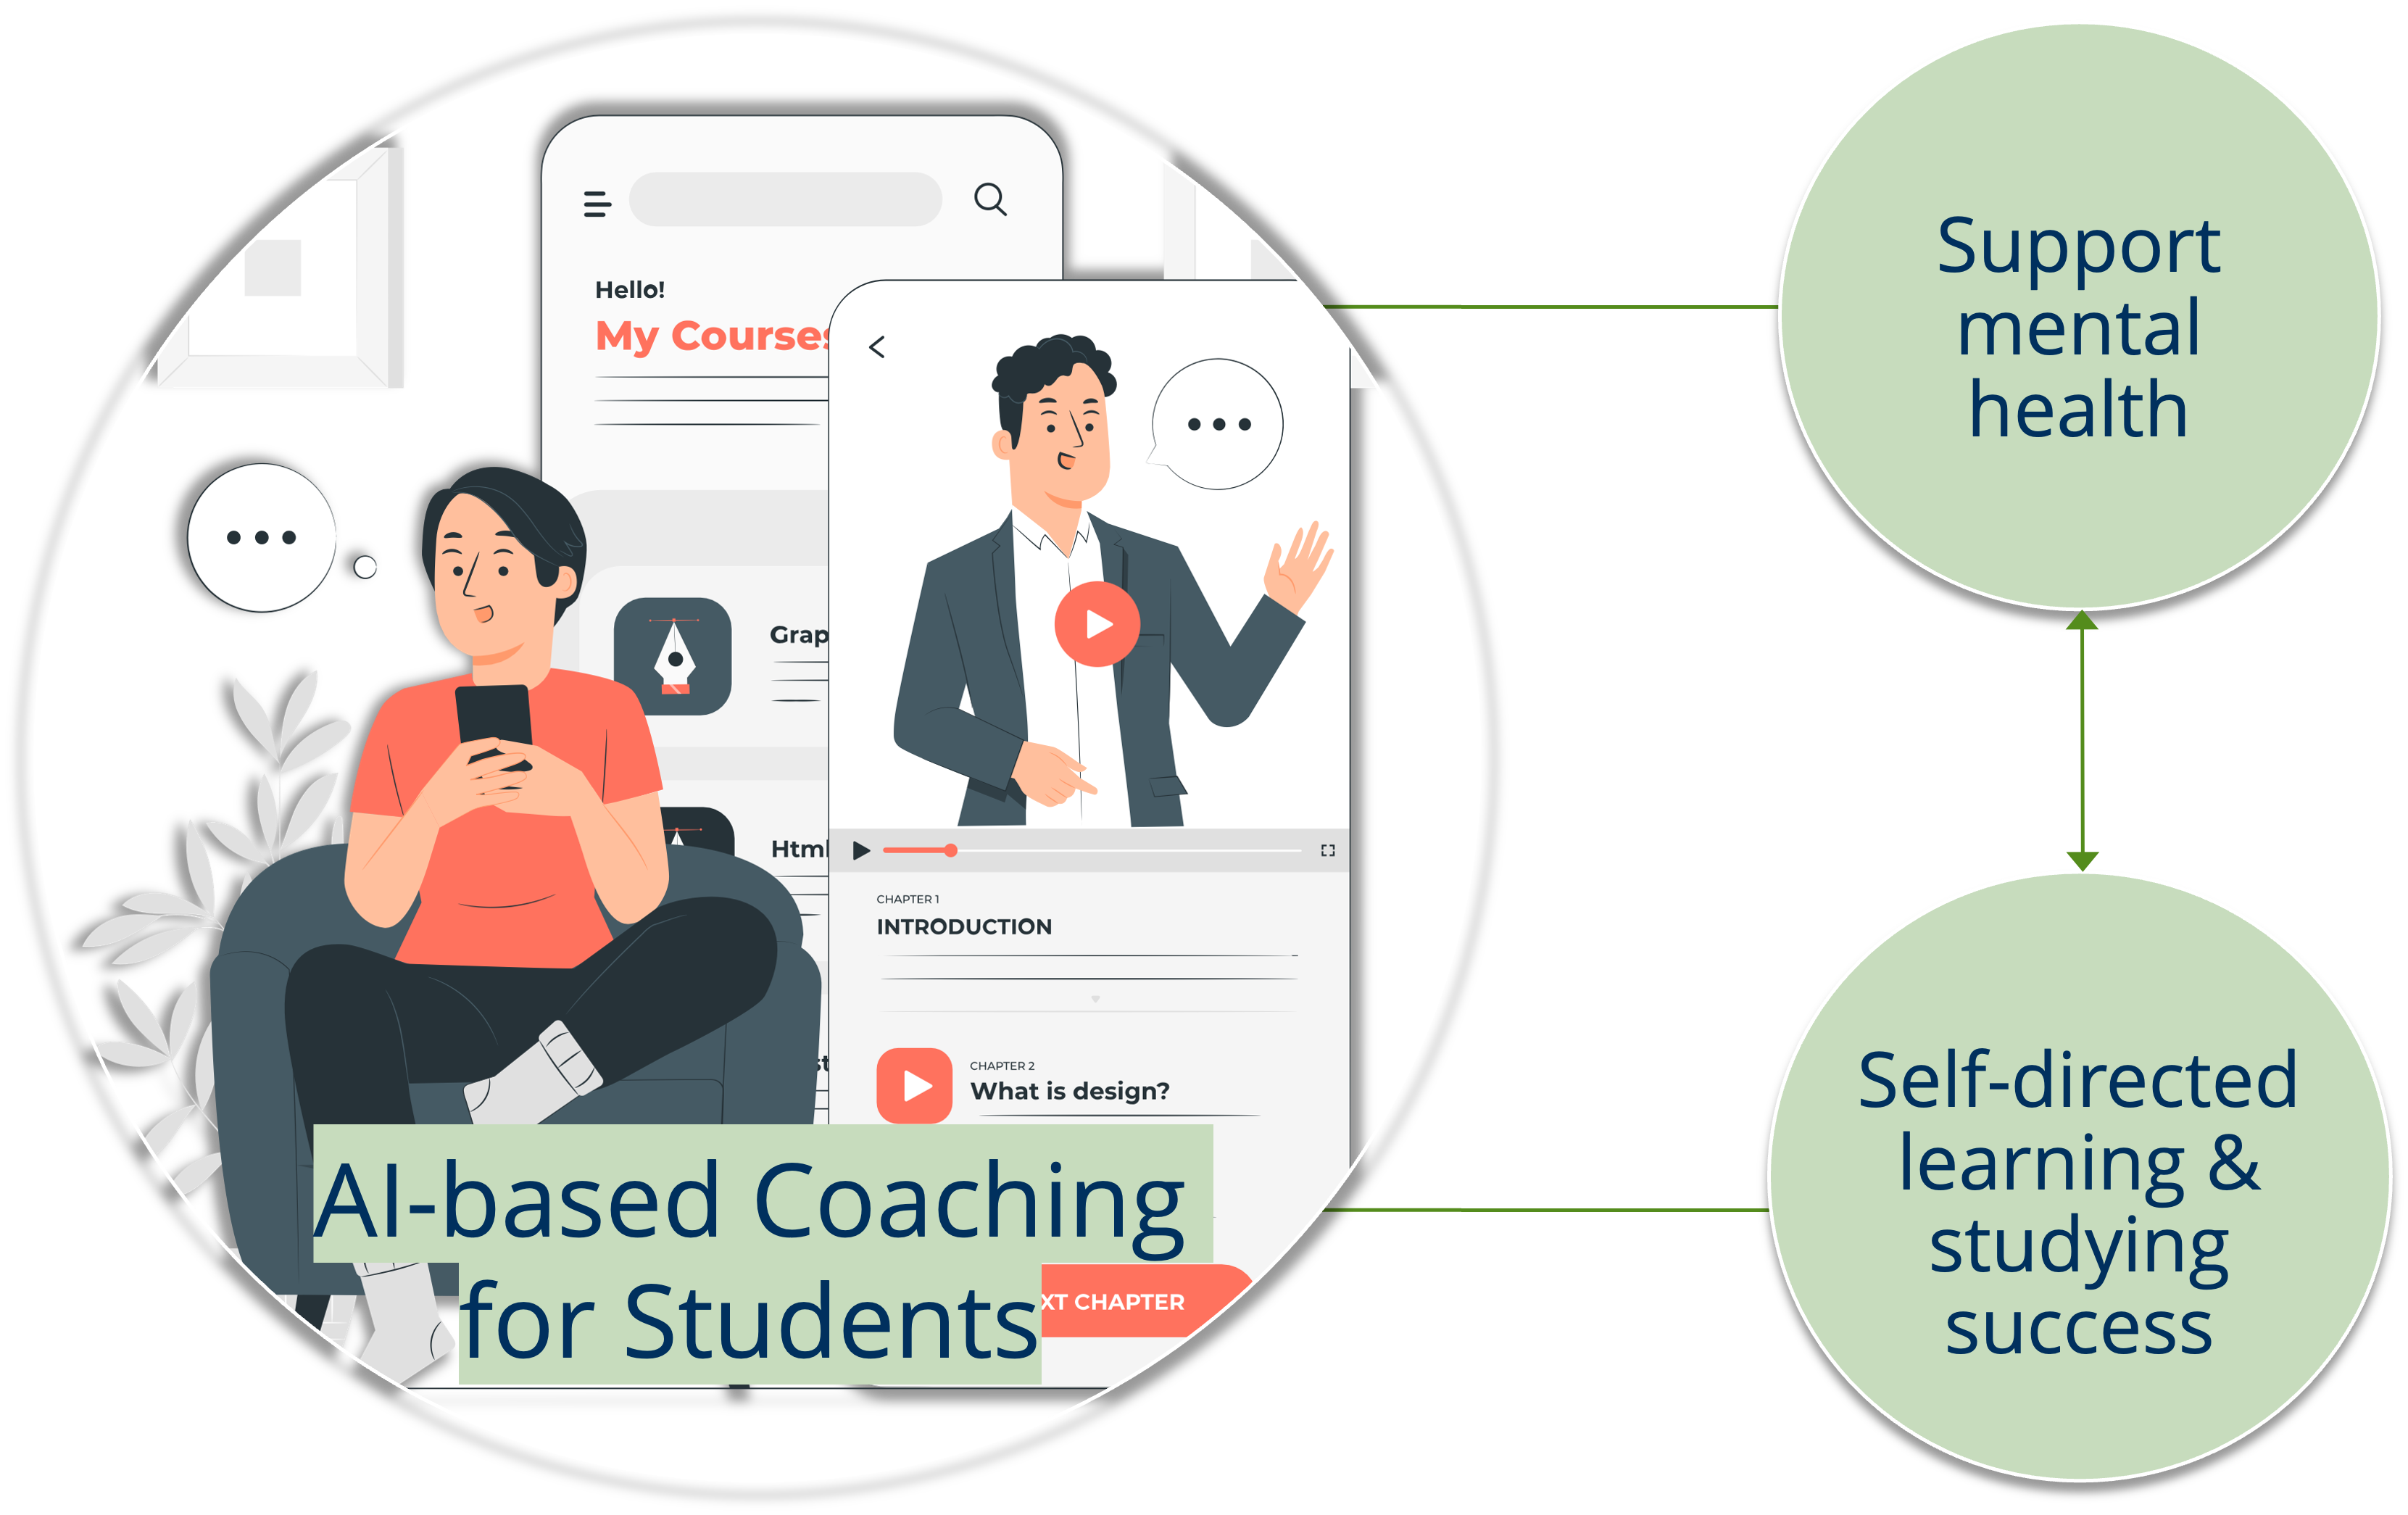 AI-based Coaching for Students supports mental health and self-directed learning and studying success.